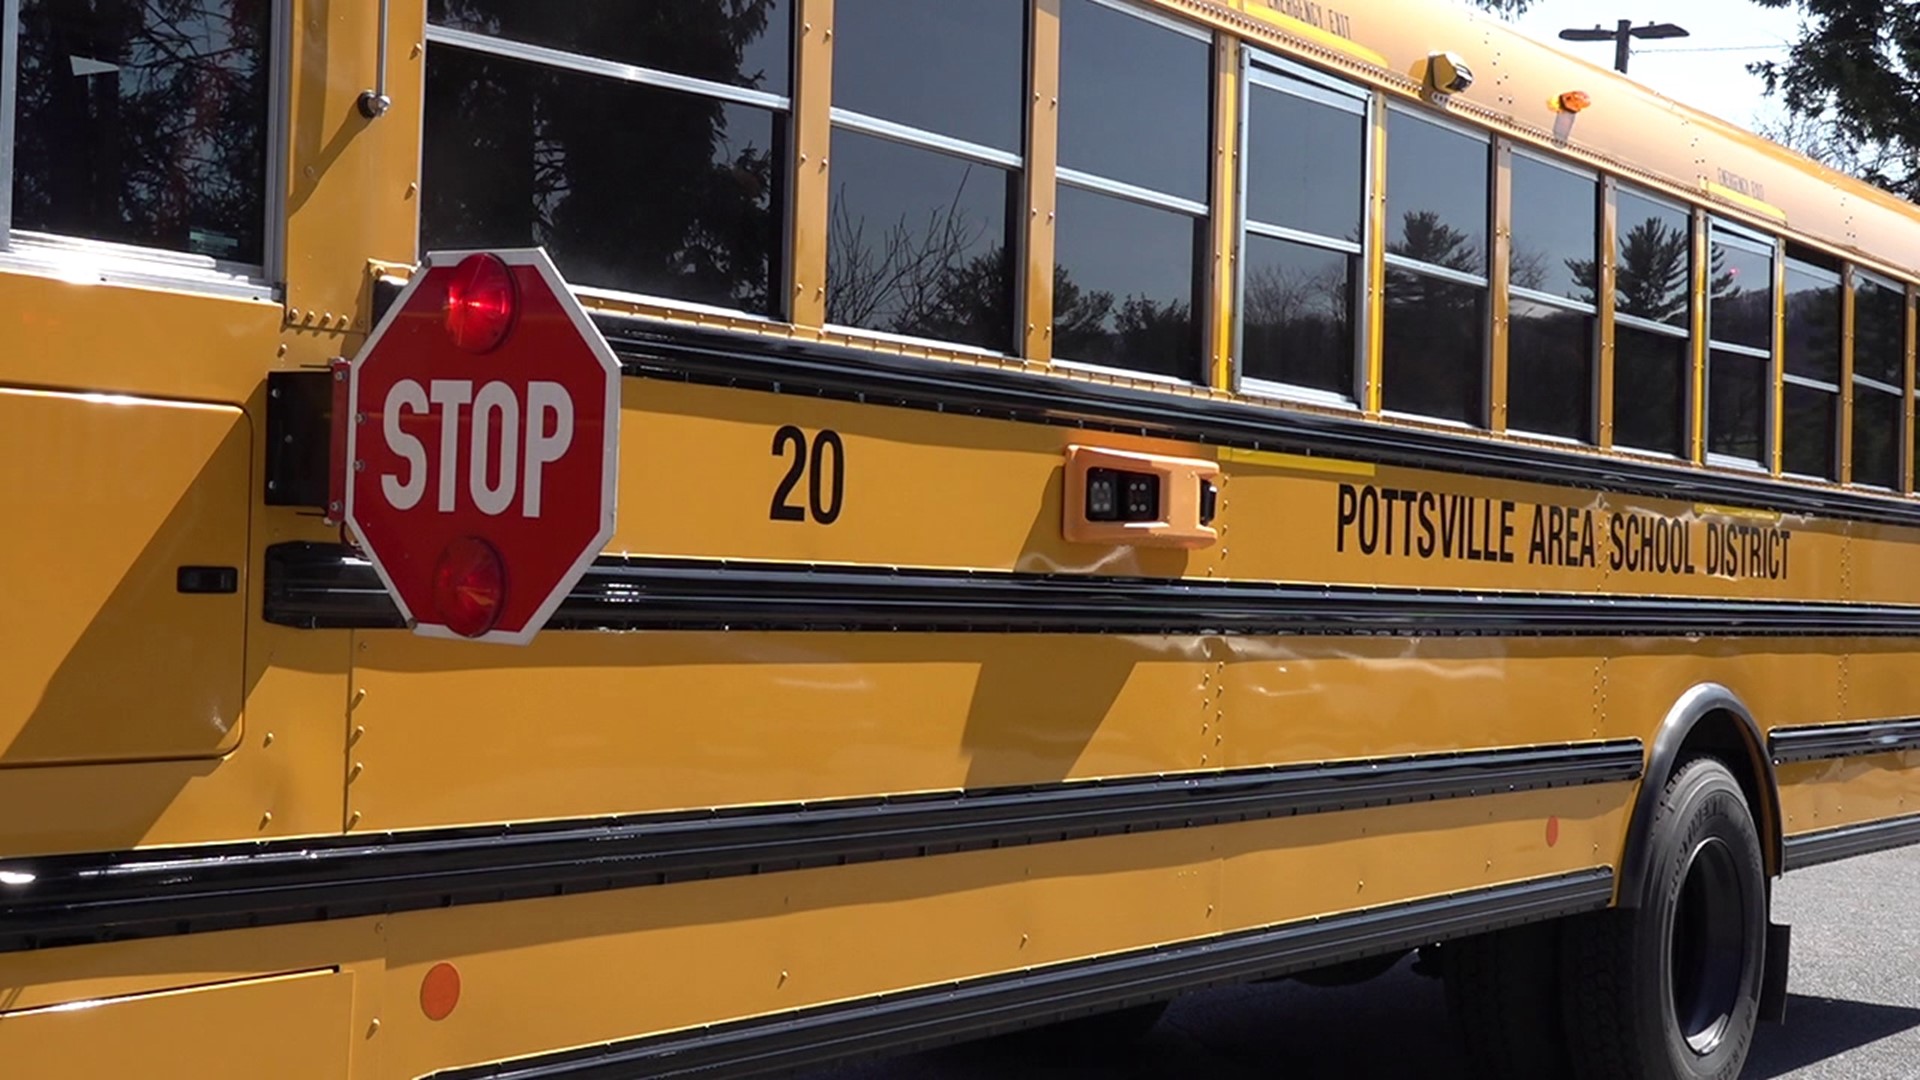 The Pottsville Area School District will fine vehicles that unlawfully pass school buses after April 1st.